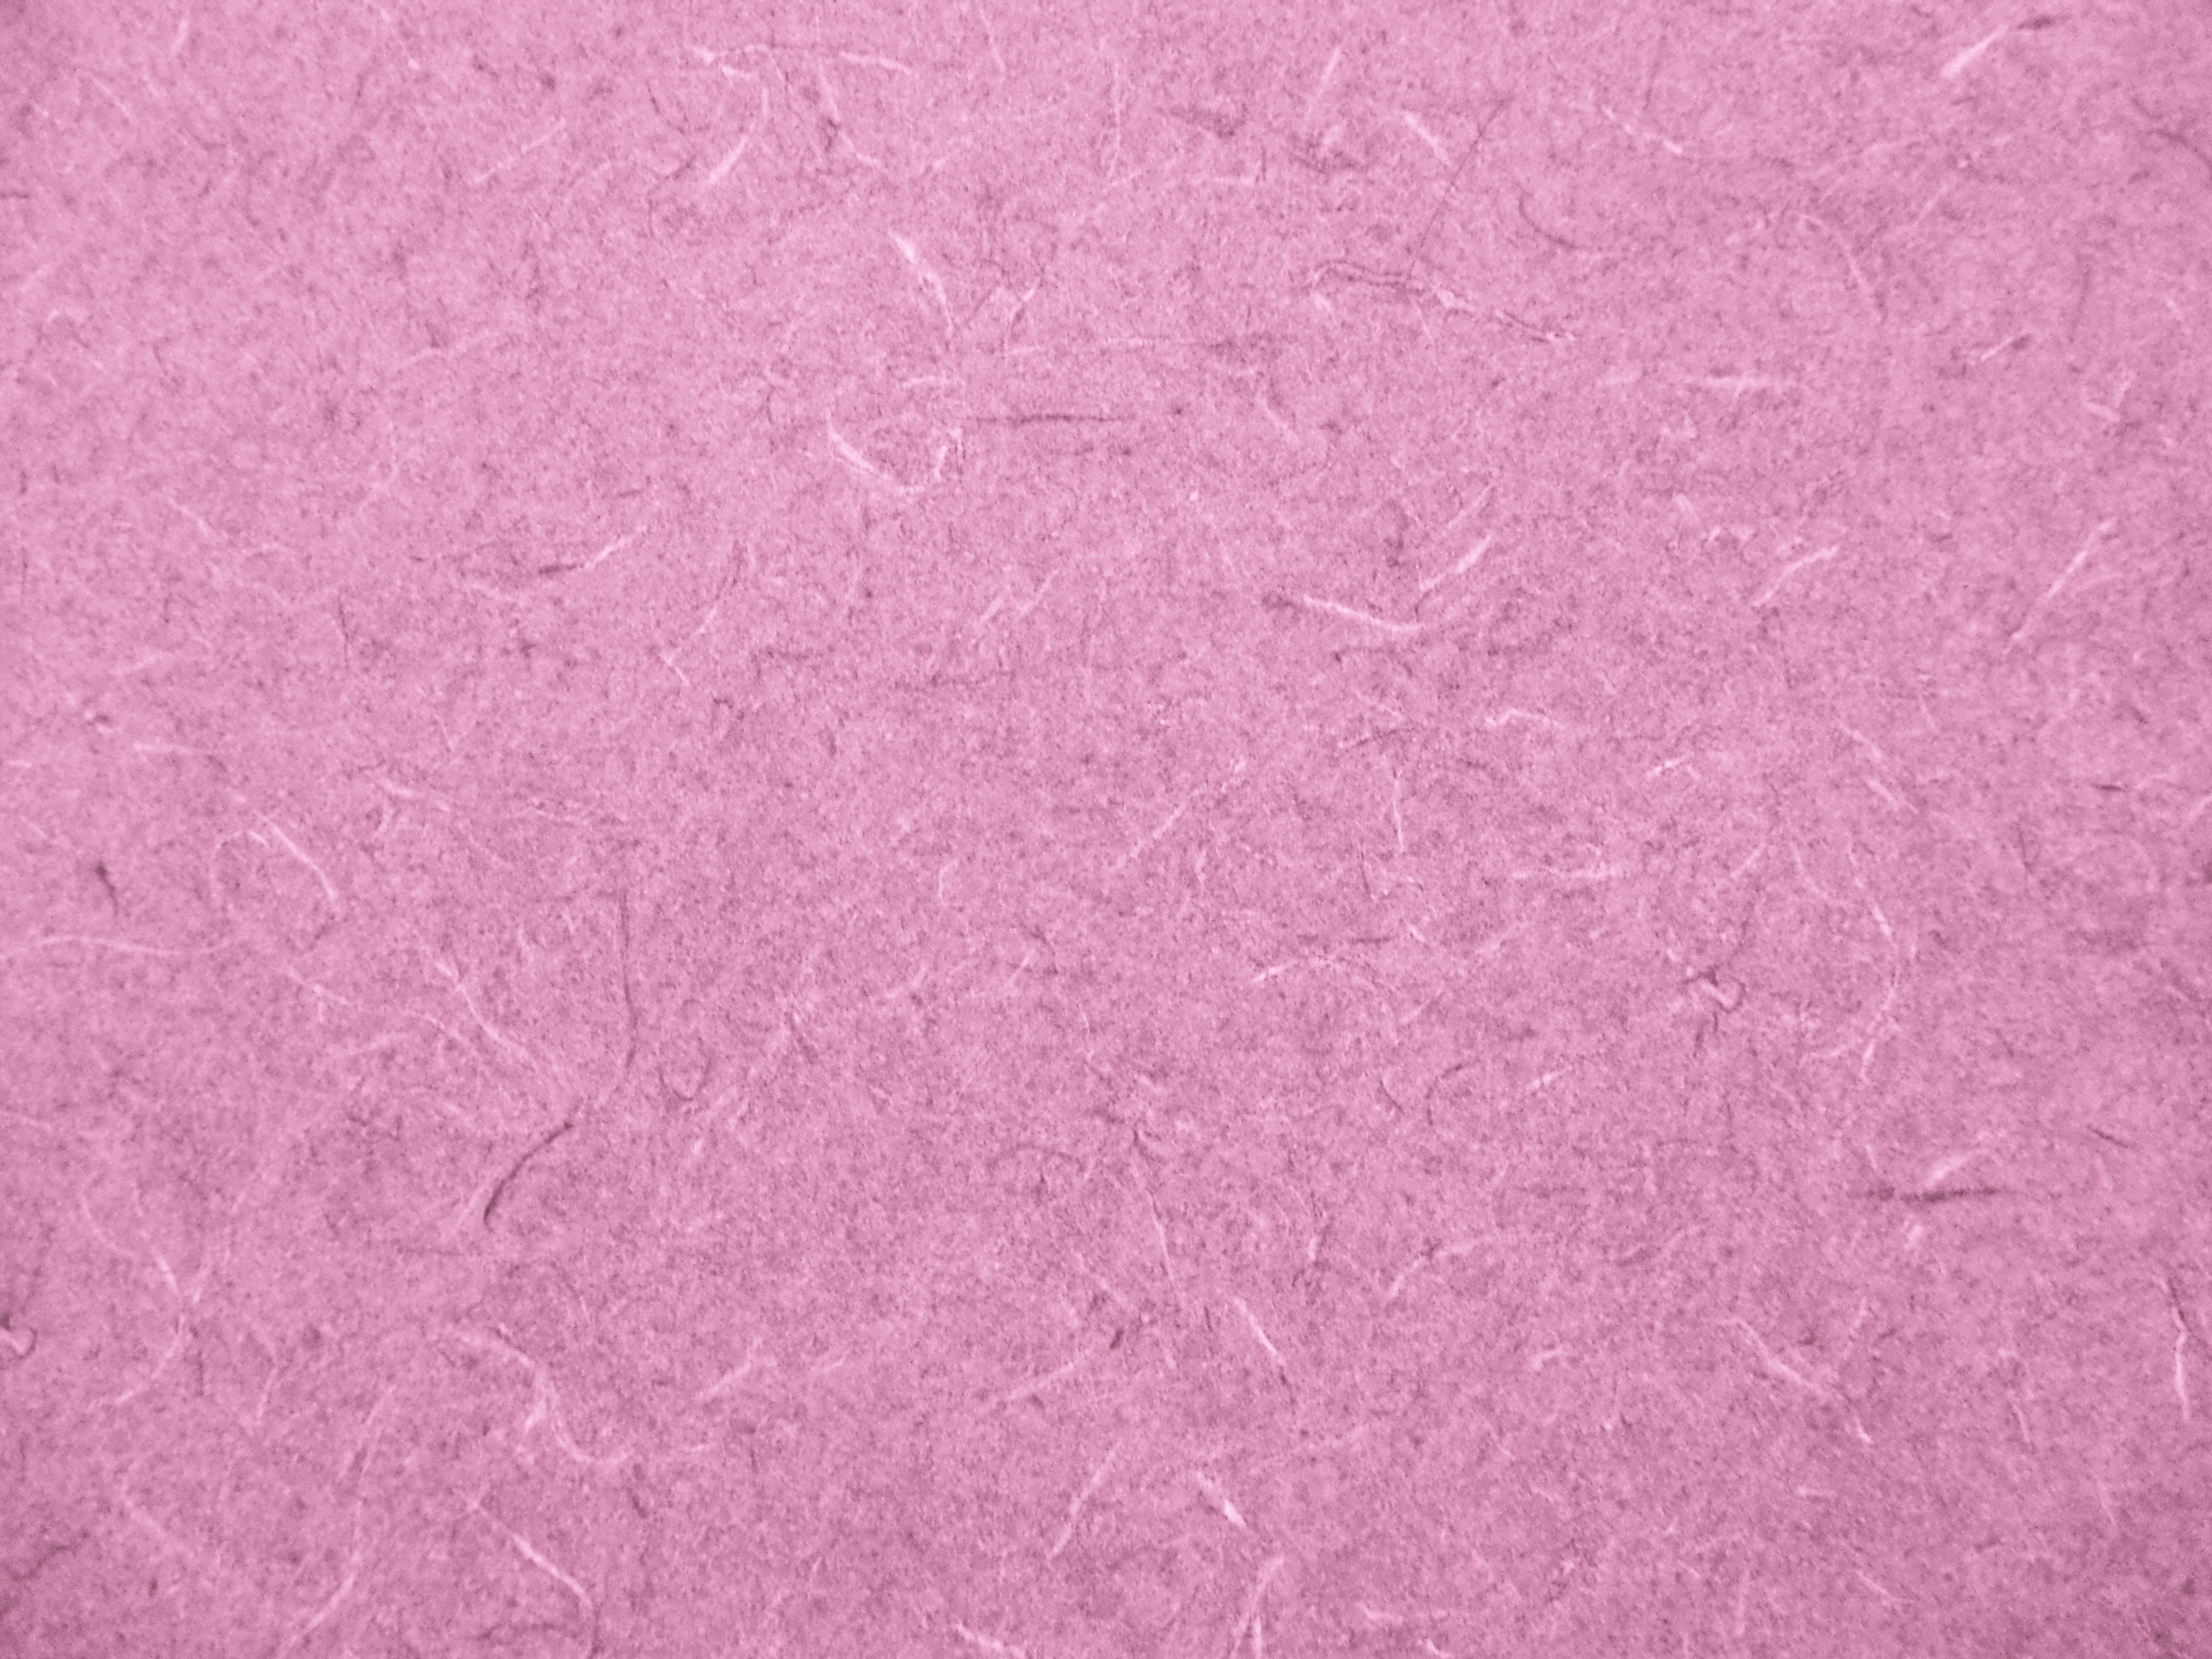 Pink Abstract Pattern Laminate Countertop Texture Picture Free